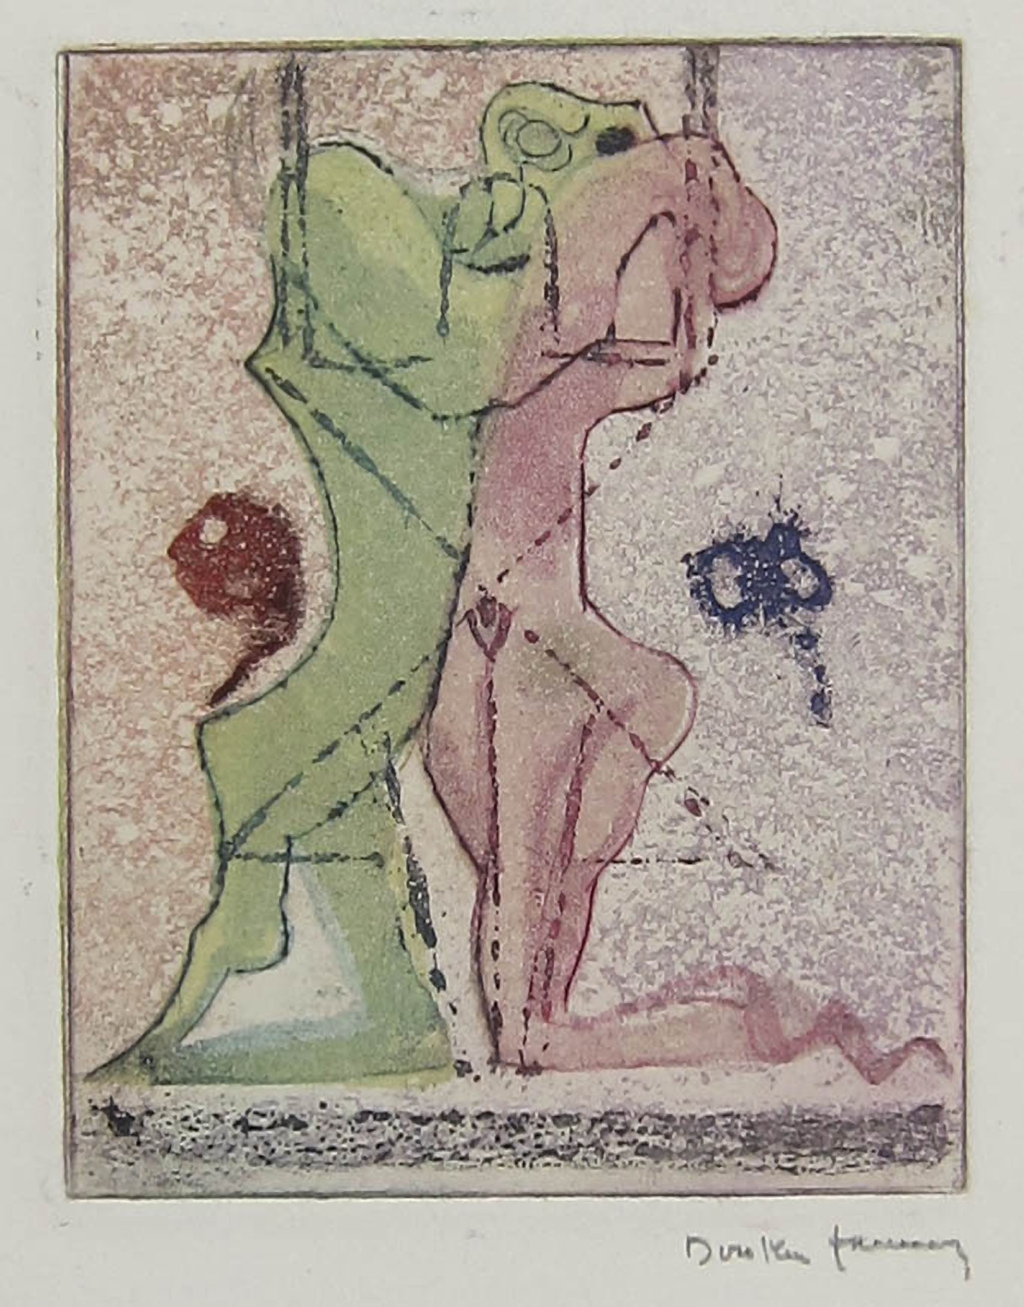 Dorothea Tanning - Untitled - 1973 color etching and aquatint